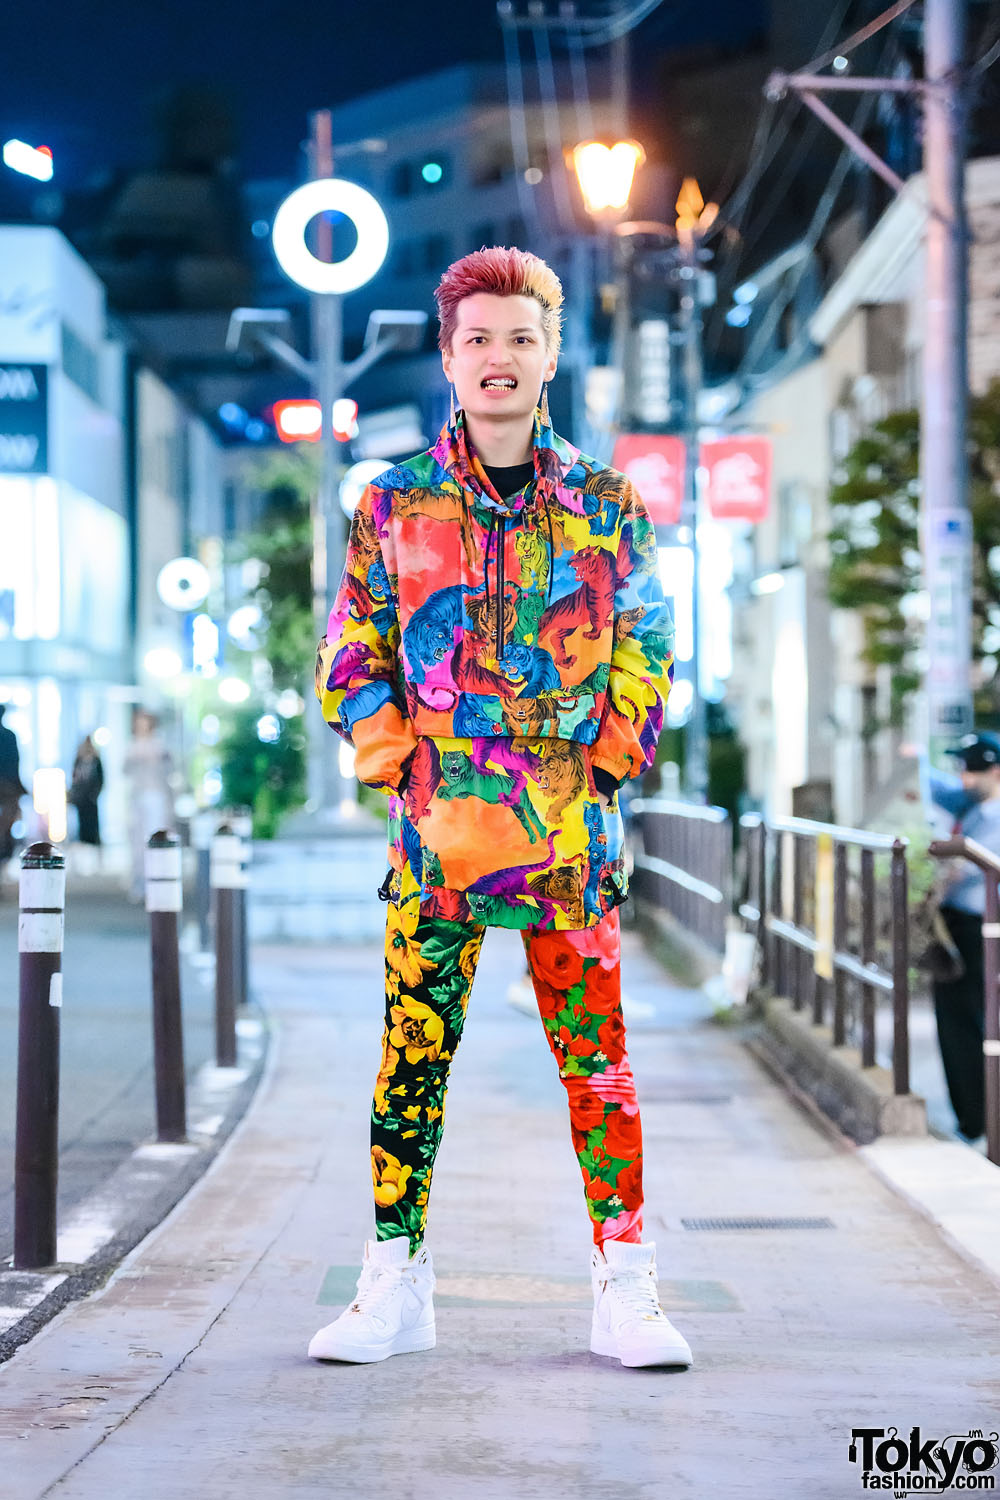 Colorful Print on Print Menswear Tokyo Street Style w/ Two-Tone Hair, Valentino Tiger Jacket, Richard Quinn Floral Print Tights & Nike Sneakers